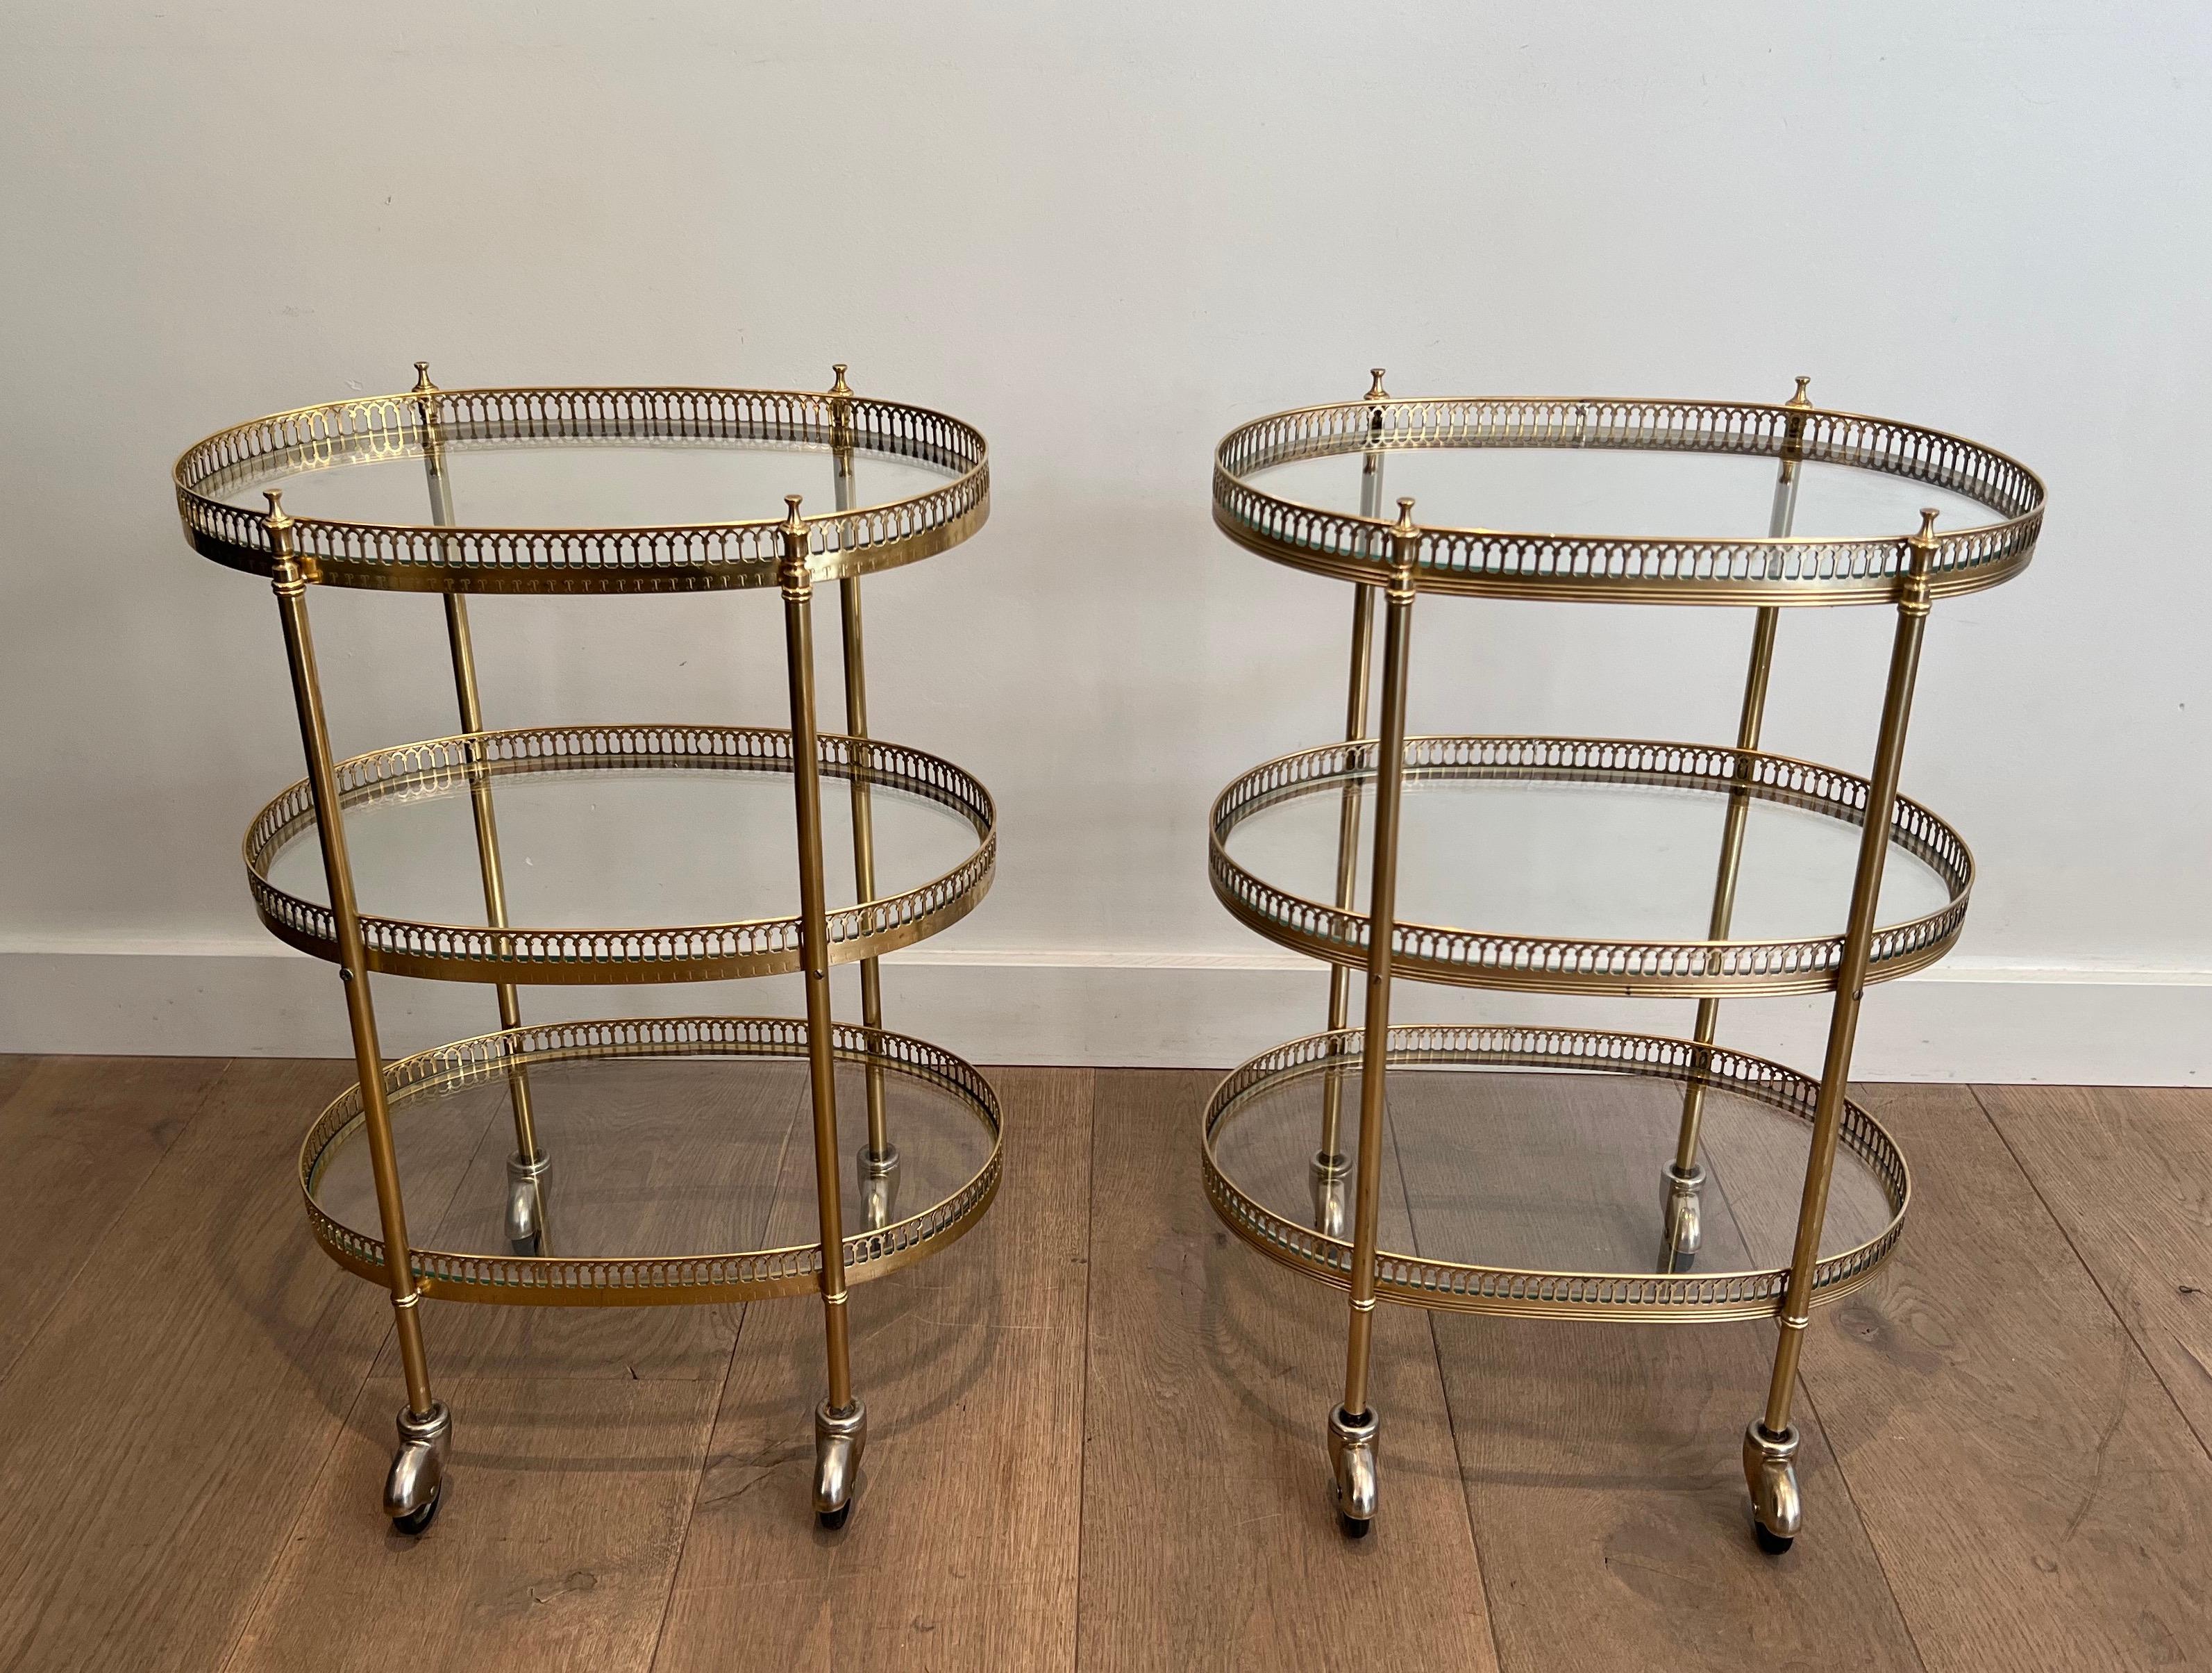 This very nice and rare pair of neoclassical style 3 tiers oval drinks trolley is smade of brass with 2 glass shelves. This is a French work in the style of Maison Jansen. Circa 1940.